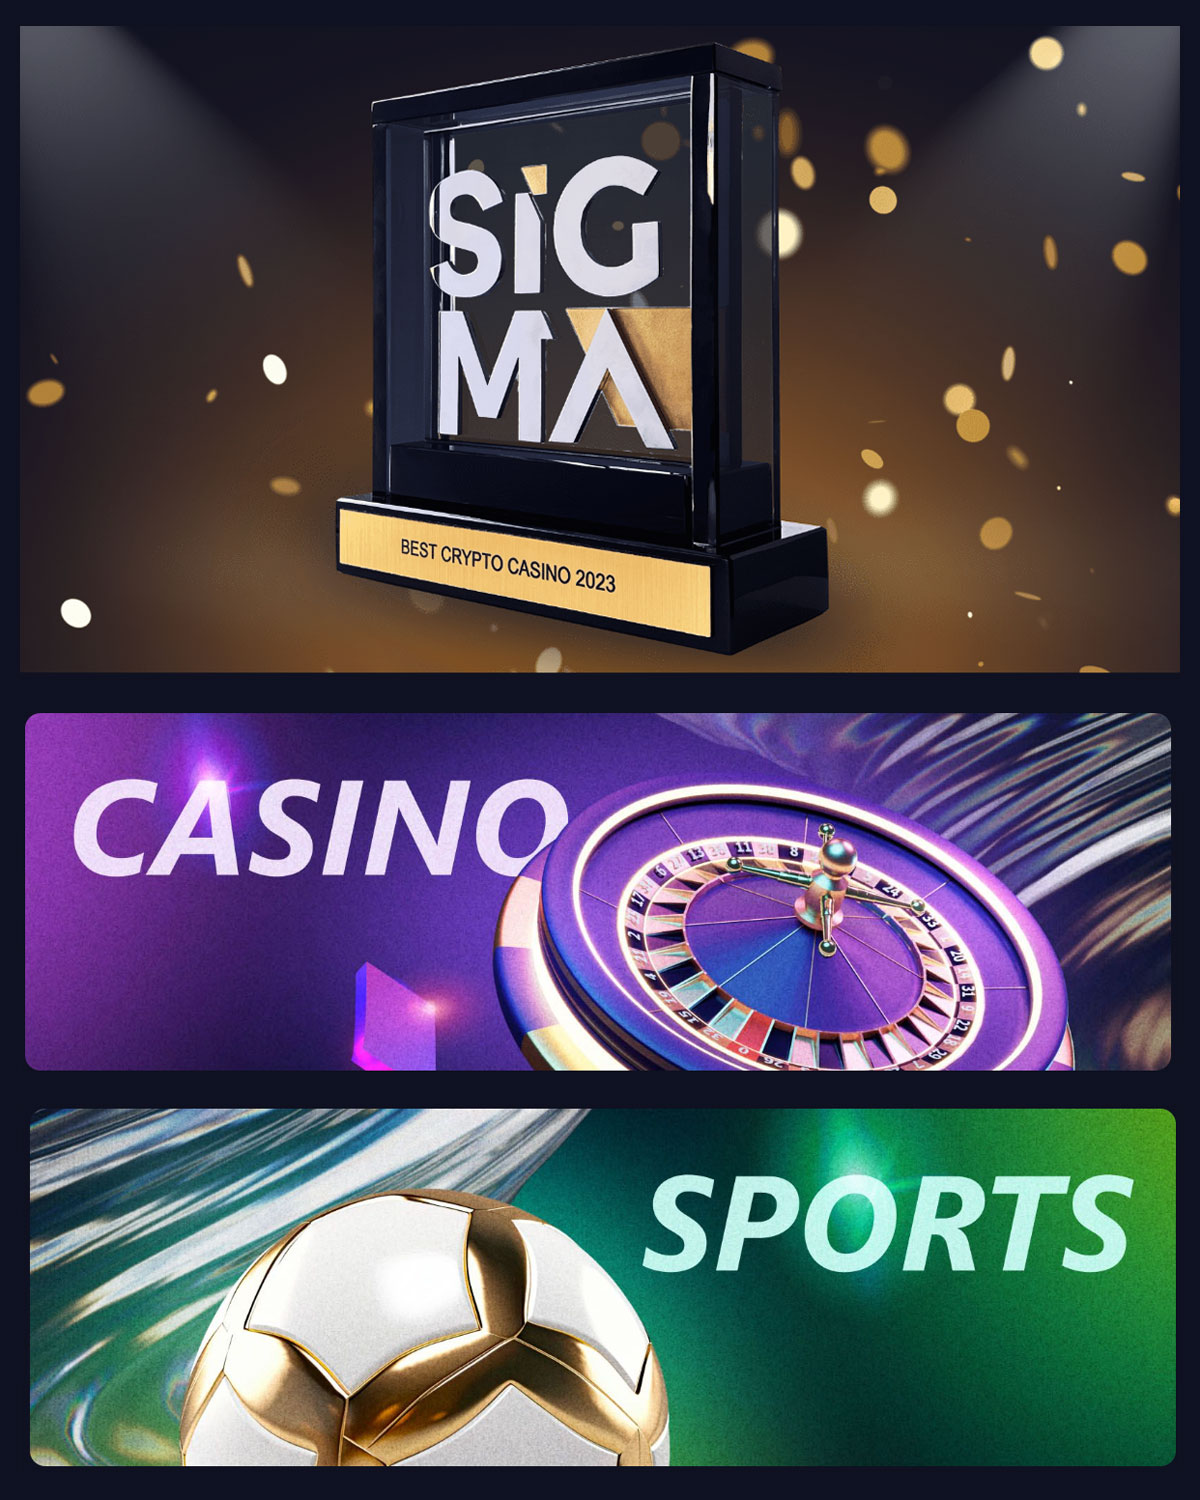 Top-Rated Crypto Casino & Sportsbook of 2023